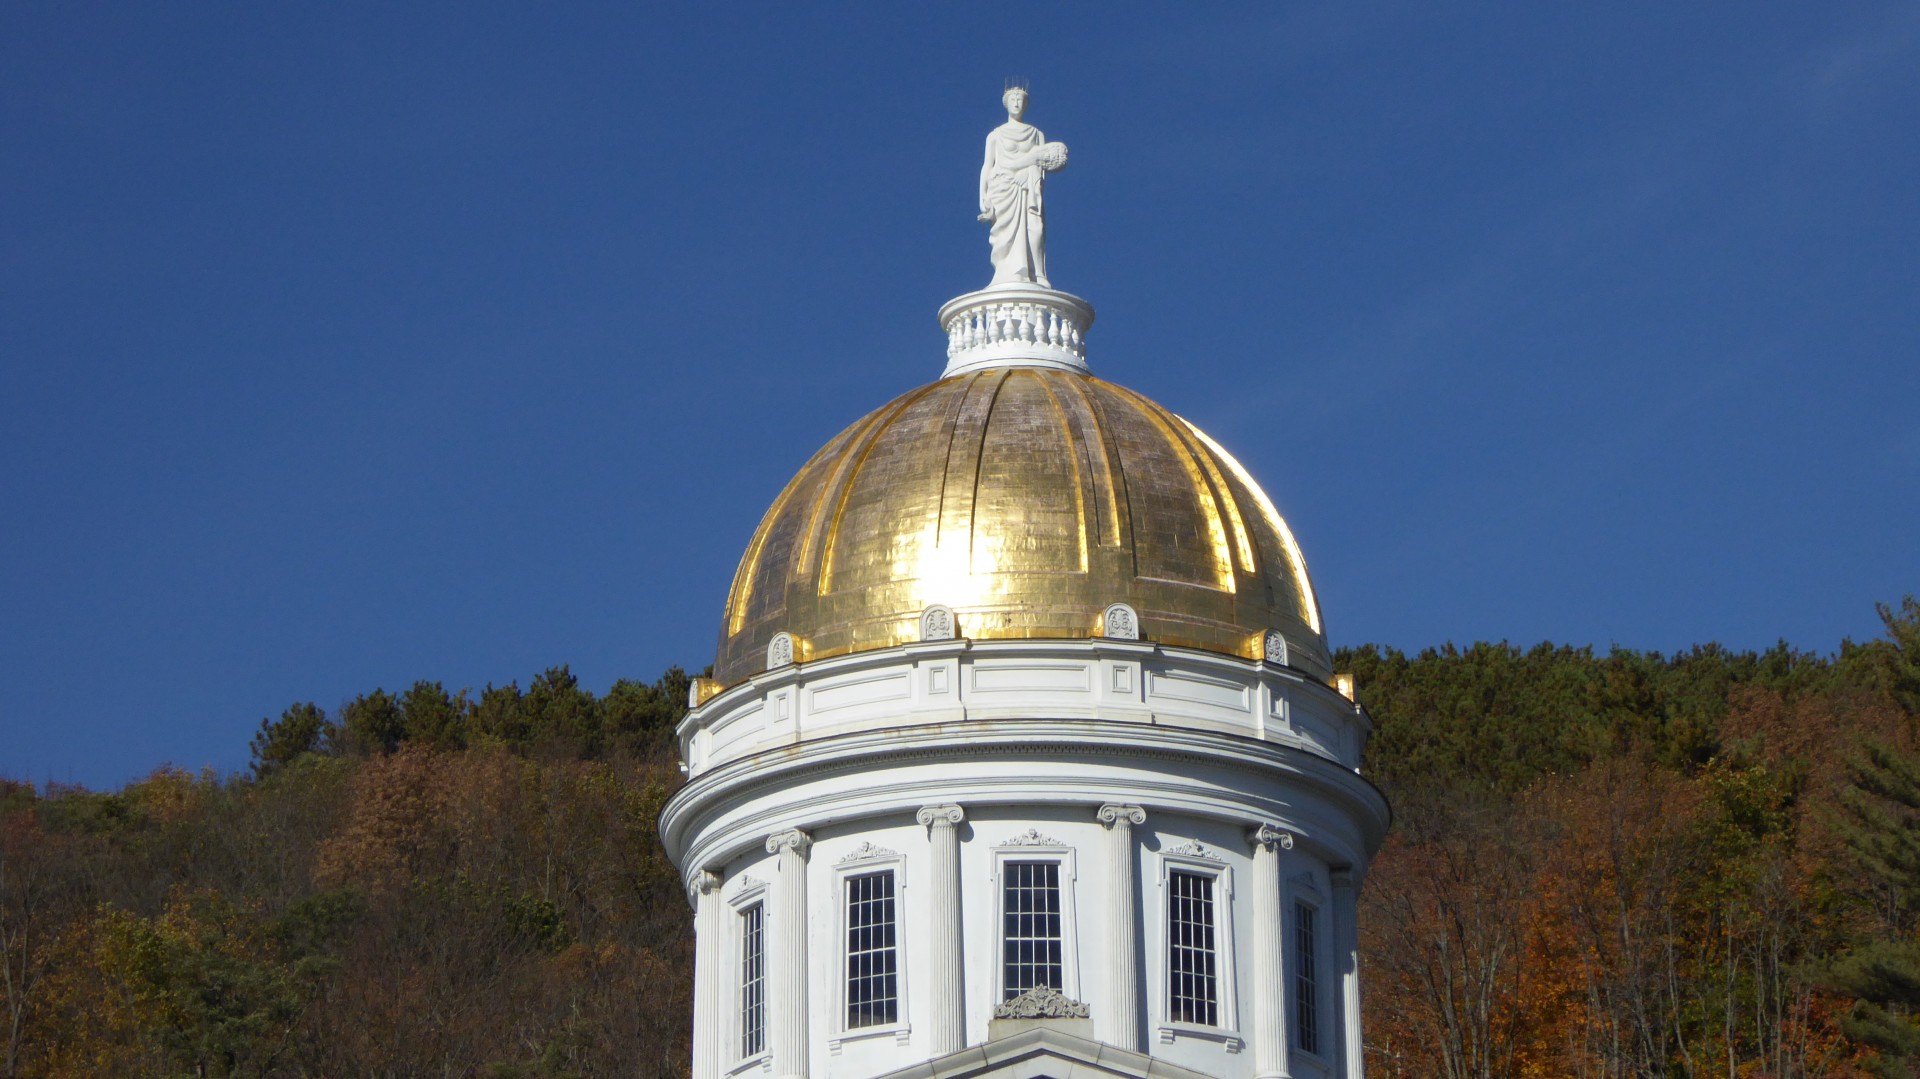 Capital building in Montpelier Vermont with a gold dome and Greek statue. Autumn foliage in the background